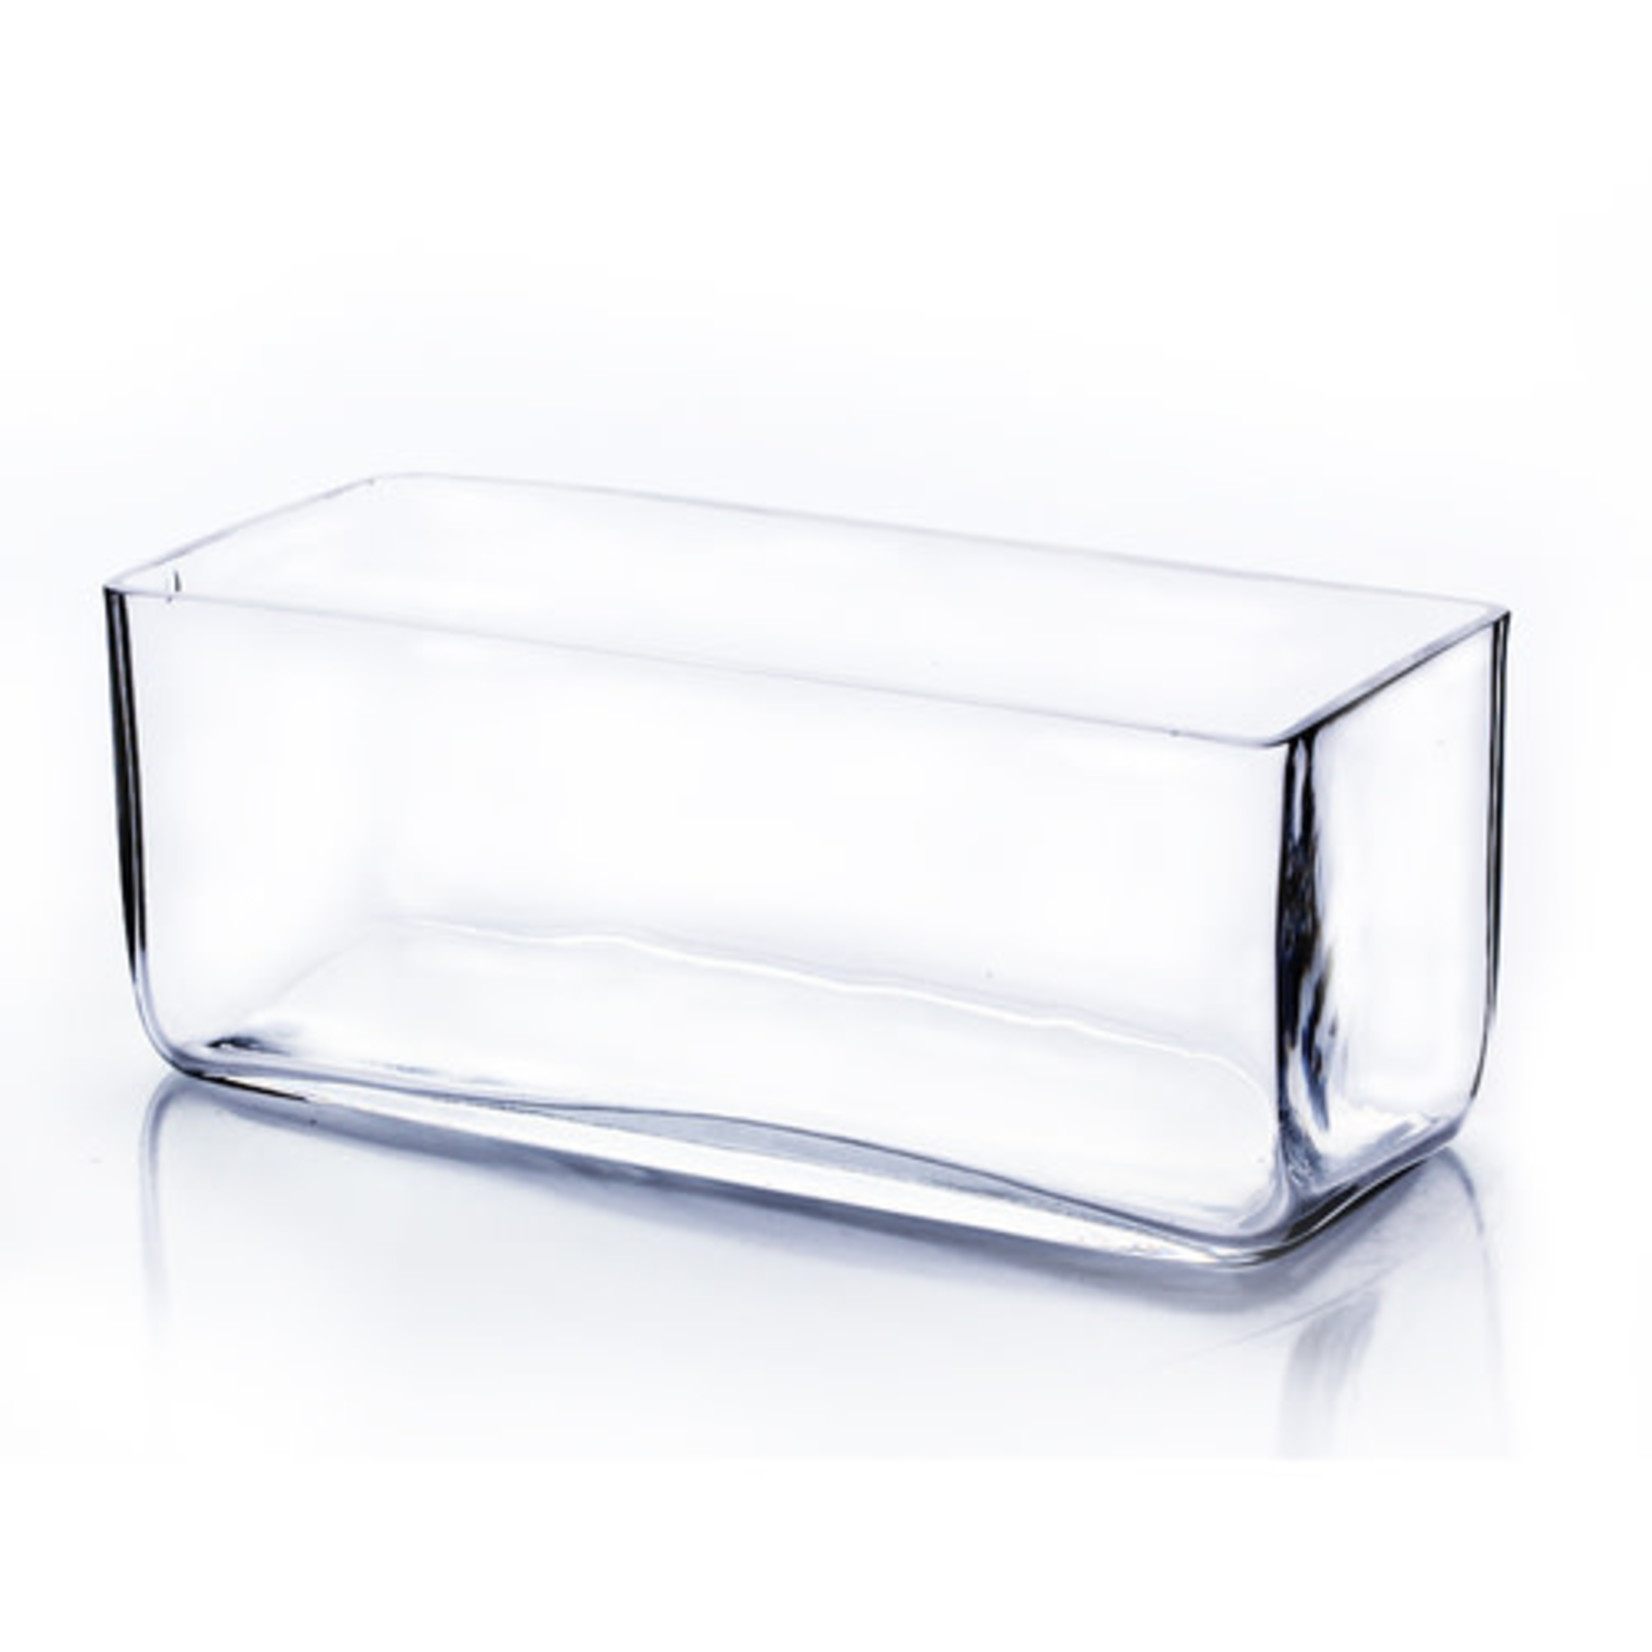 4"H X 10" X 4" LOW RECTANGLE GLASS VASE